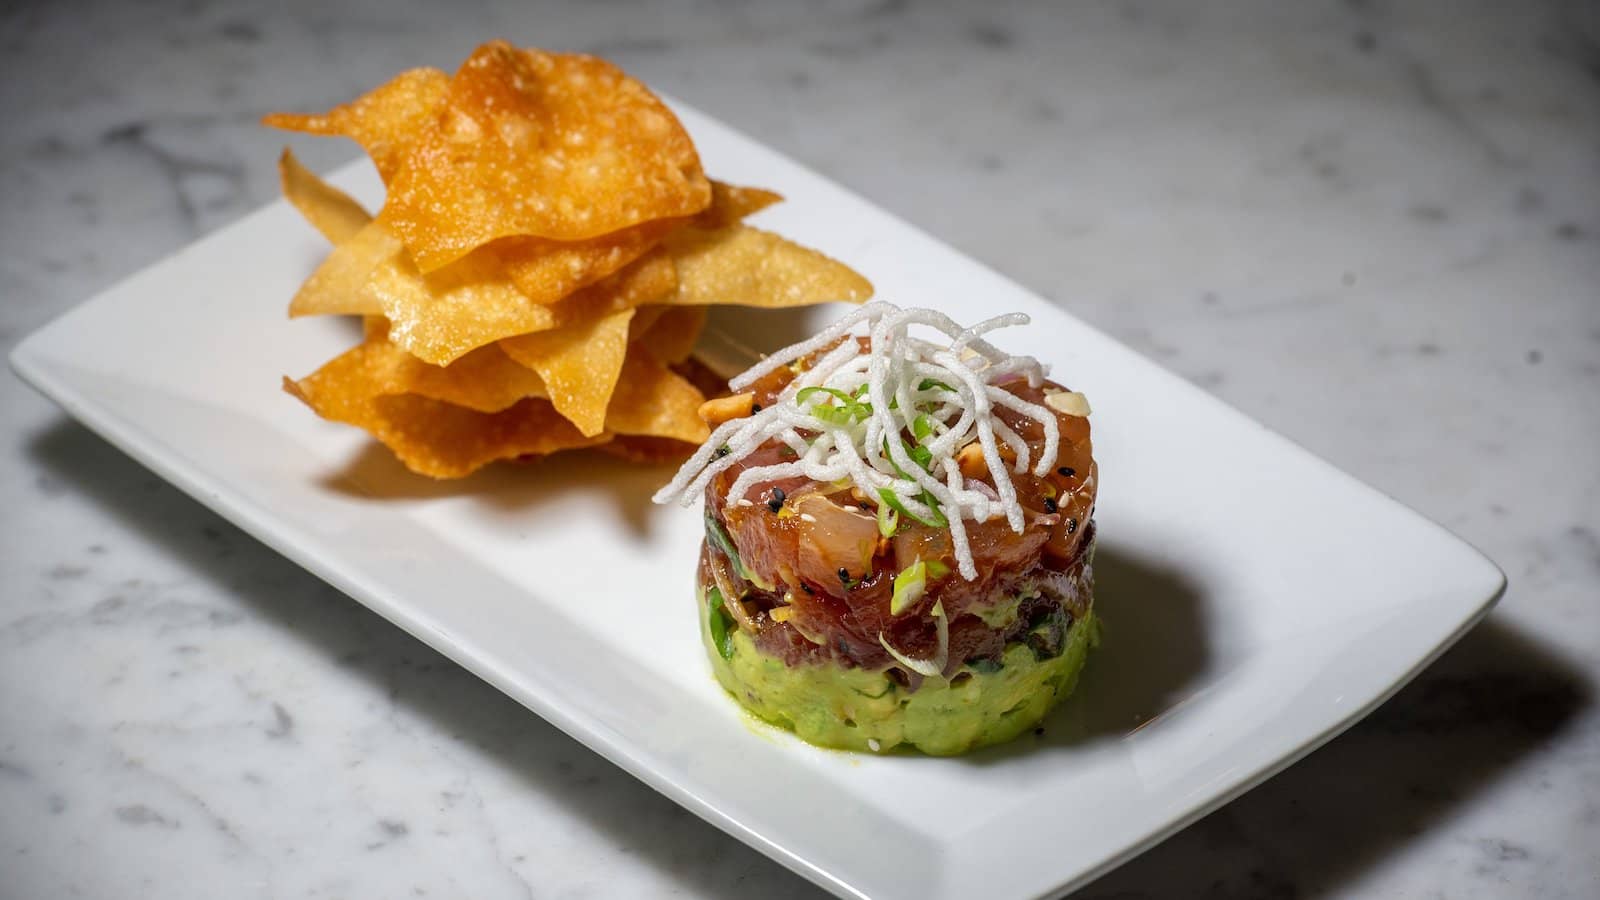 Crispy chips are served to scoop a tasty tombo tuna poke tower with diced avocado topped with the spicy, soy sauce-based marinated fish. (Jeremy Portje/ Marin Independent Journal)